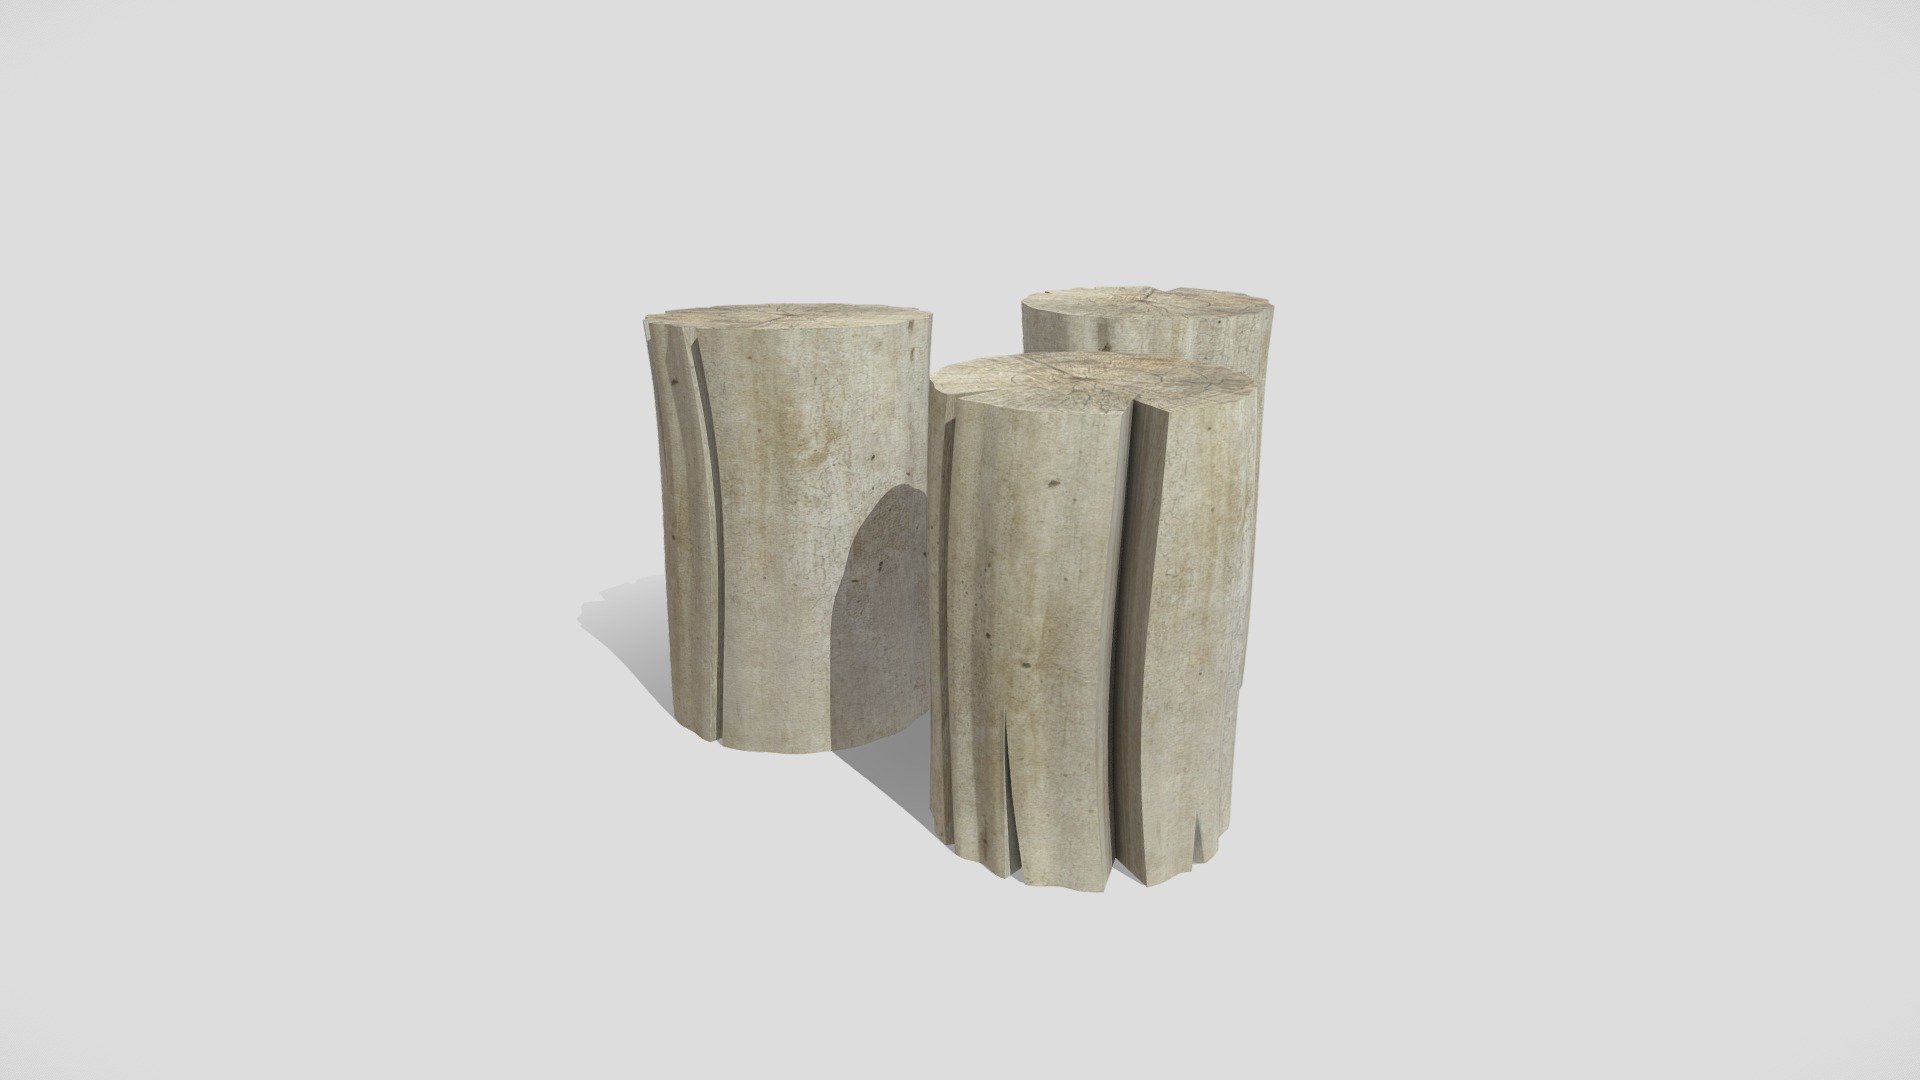 Wood Stub Side Tables

Light wood material

Natural stub cut

Ø 29 x 42,45 cm

Unwrapped, with no overlapping.

4k textures (4096x4096)

3d models: .3ds, .fbx, .obj files - Wood Stub Side Table - 3D model by gogoskilla 3d model